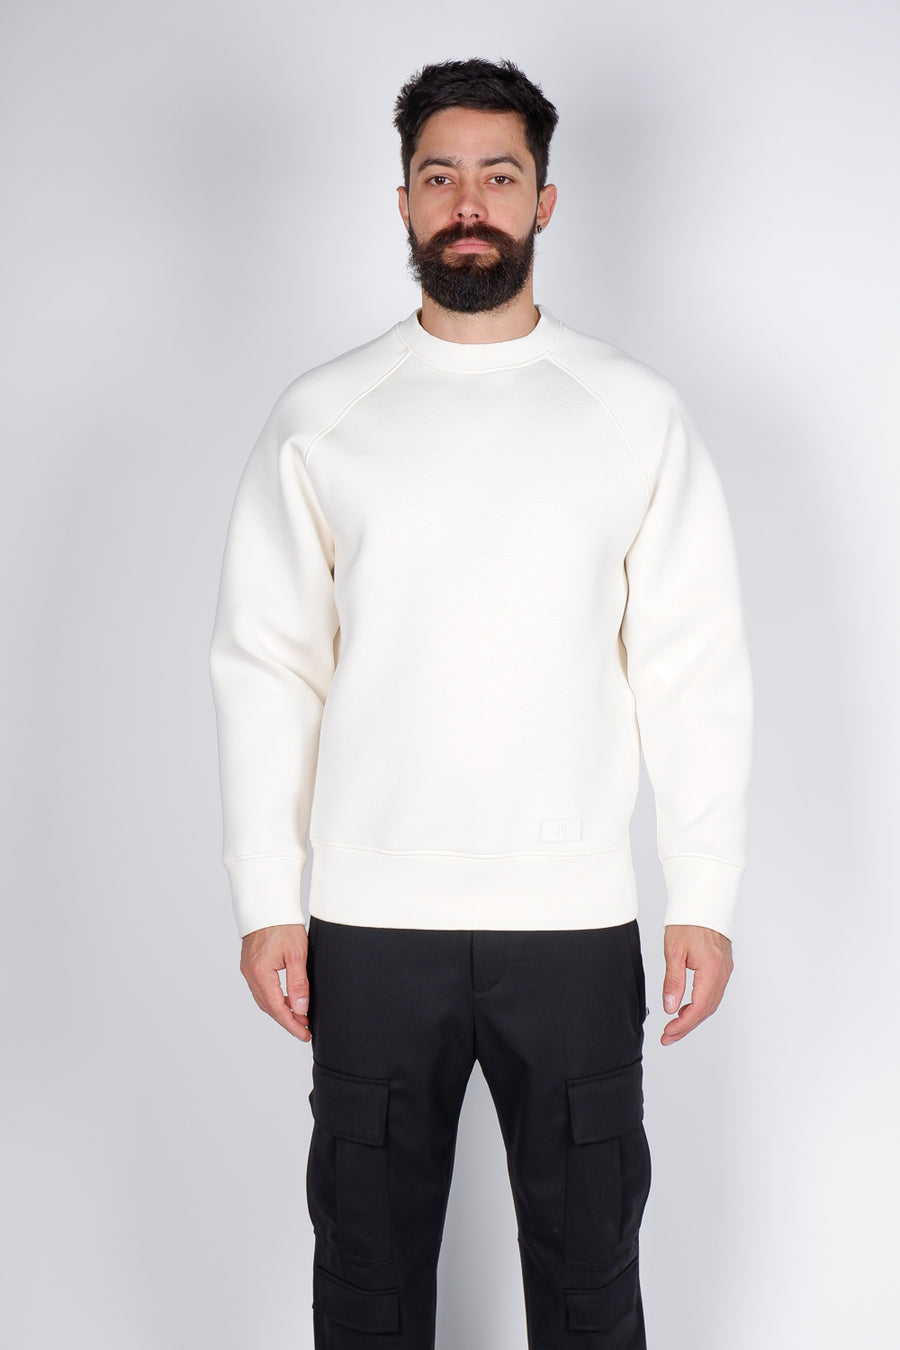 Buy the PT Torino Neoprene Sweatshirt Cream at Intro. Spend £50 for free UK delivery. Official stockists. We ship worldwide.